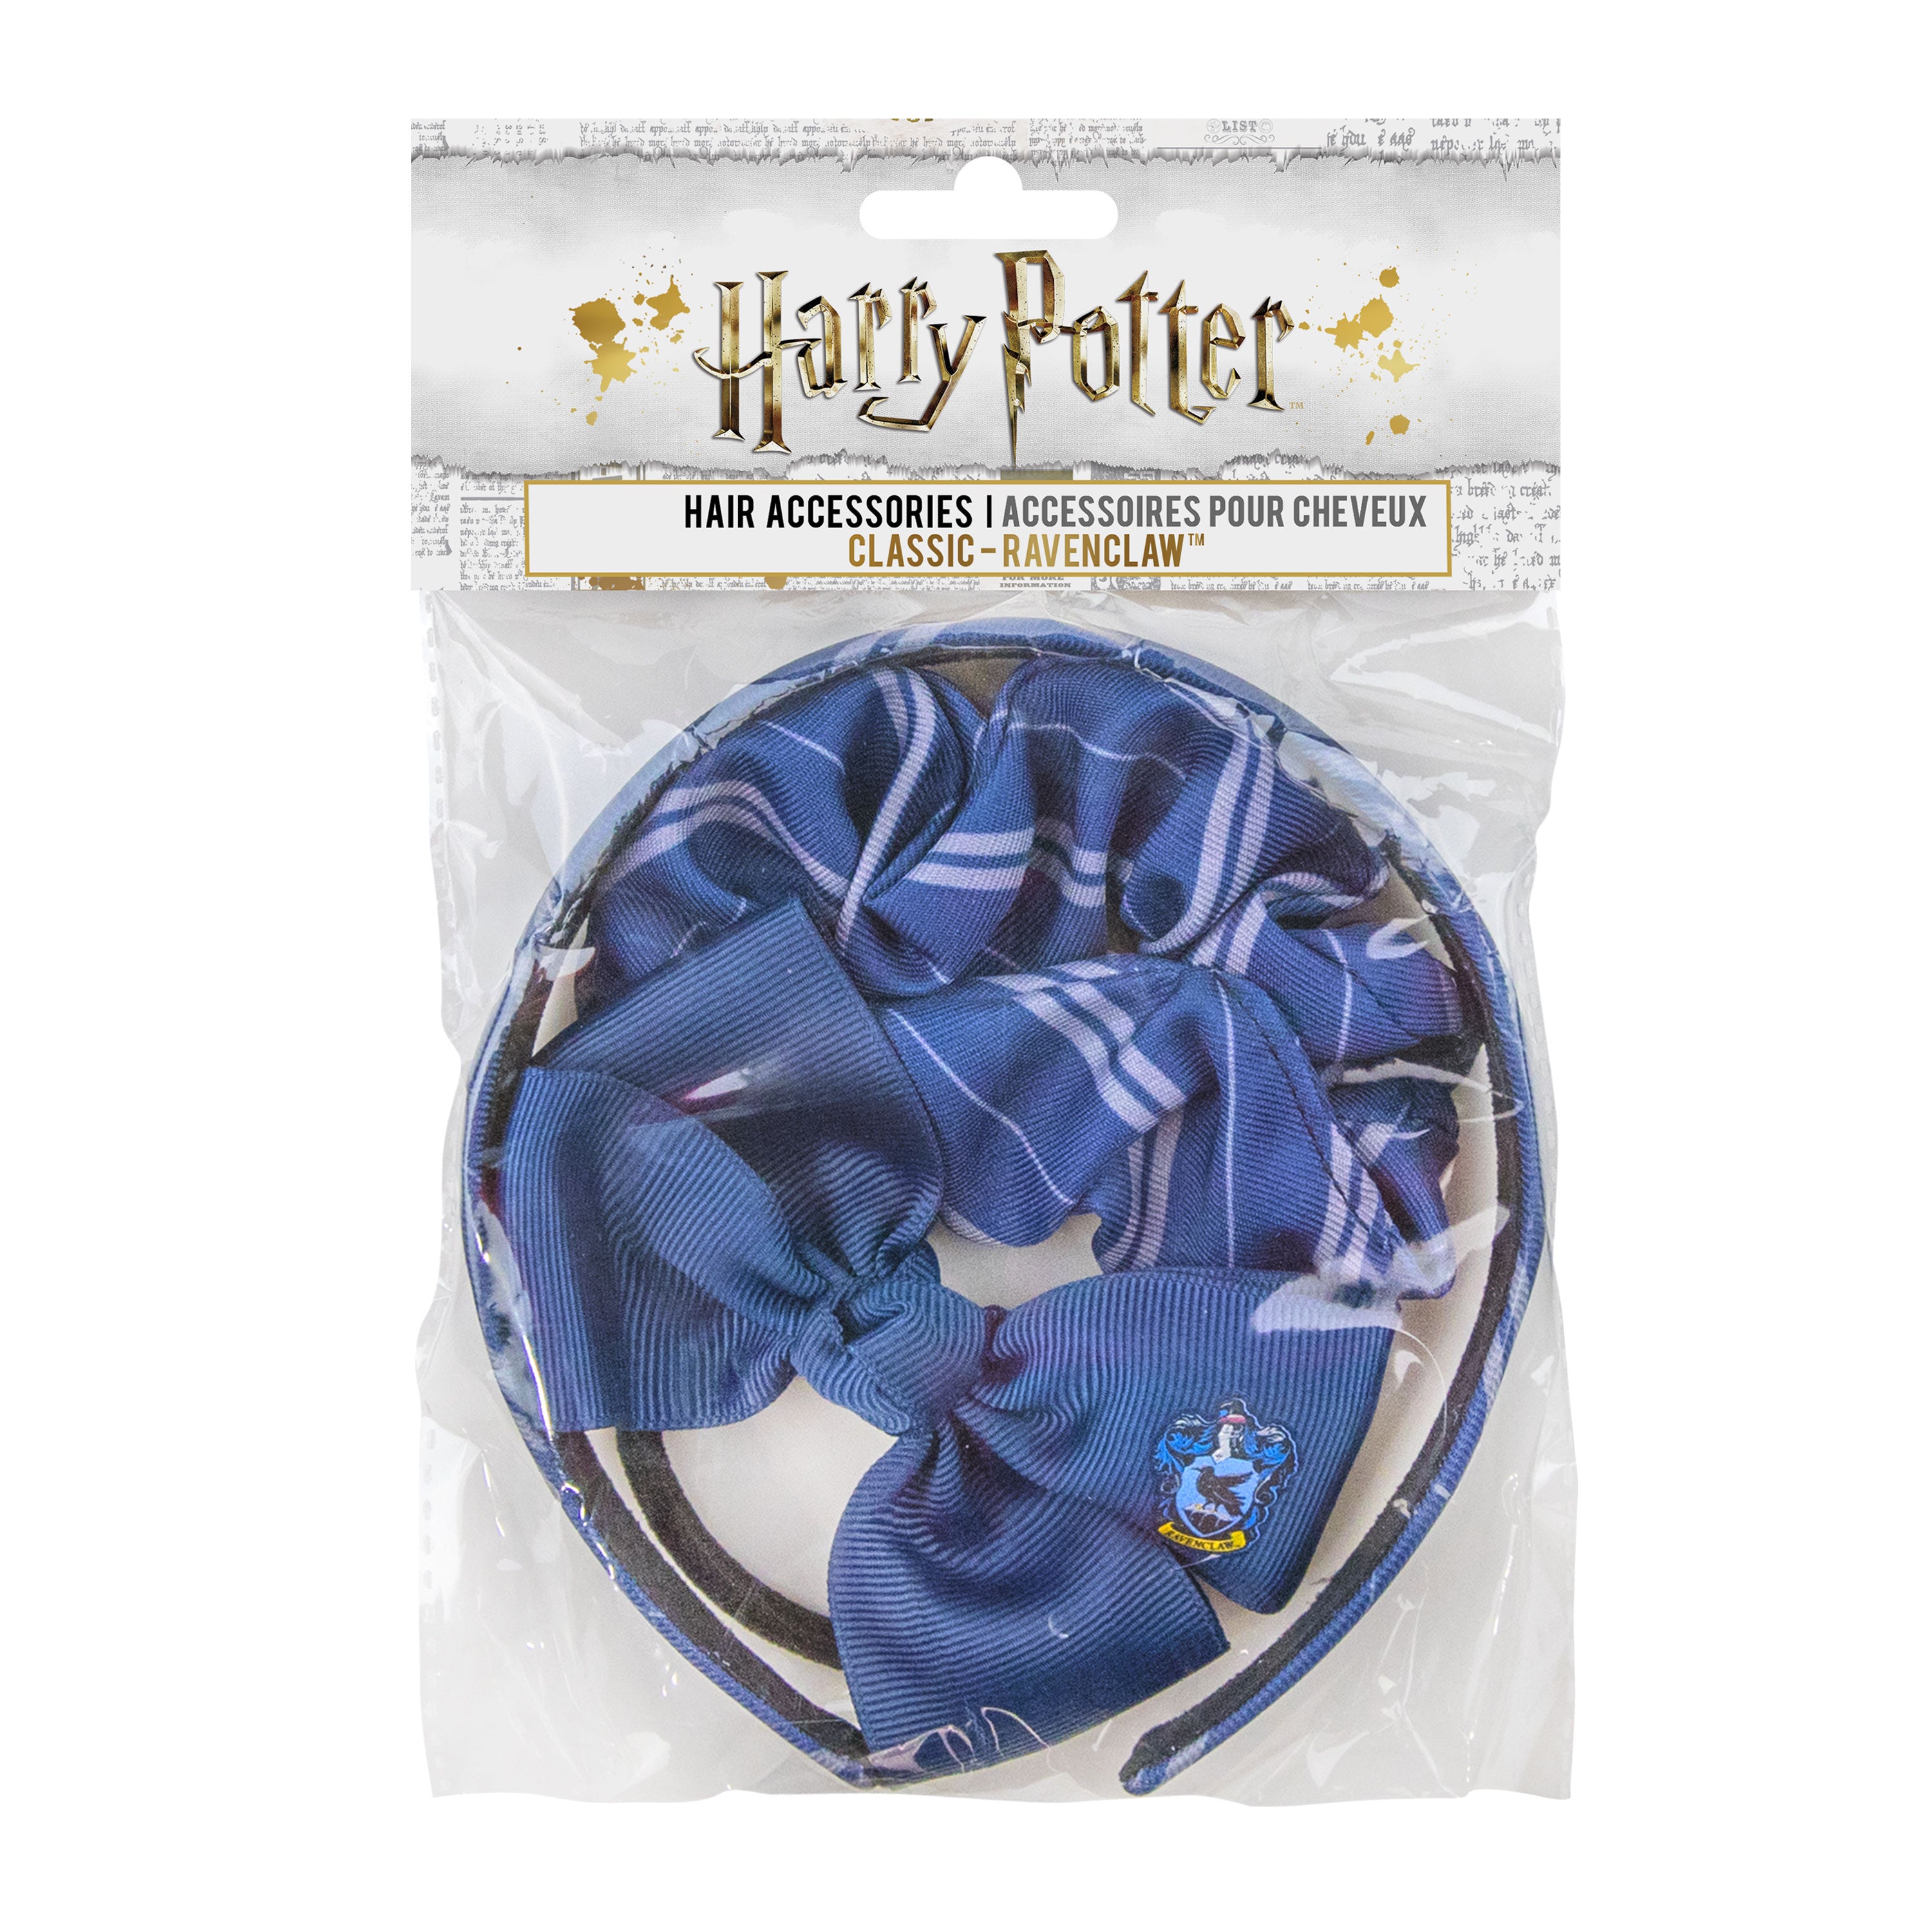 Mugs – Harry Potter™: Magic at Play Merchandise by Creative Goods